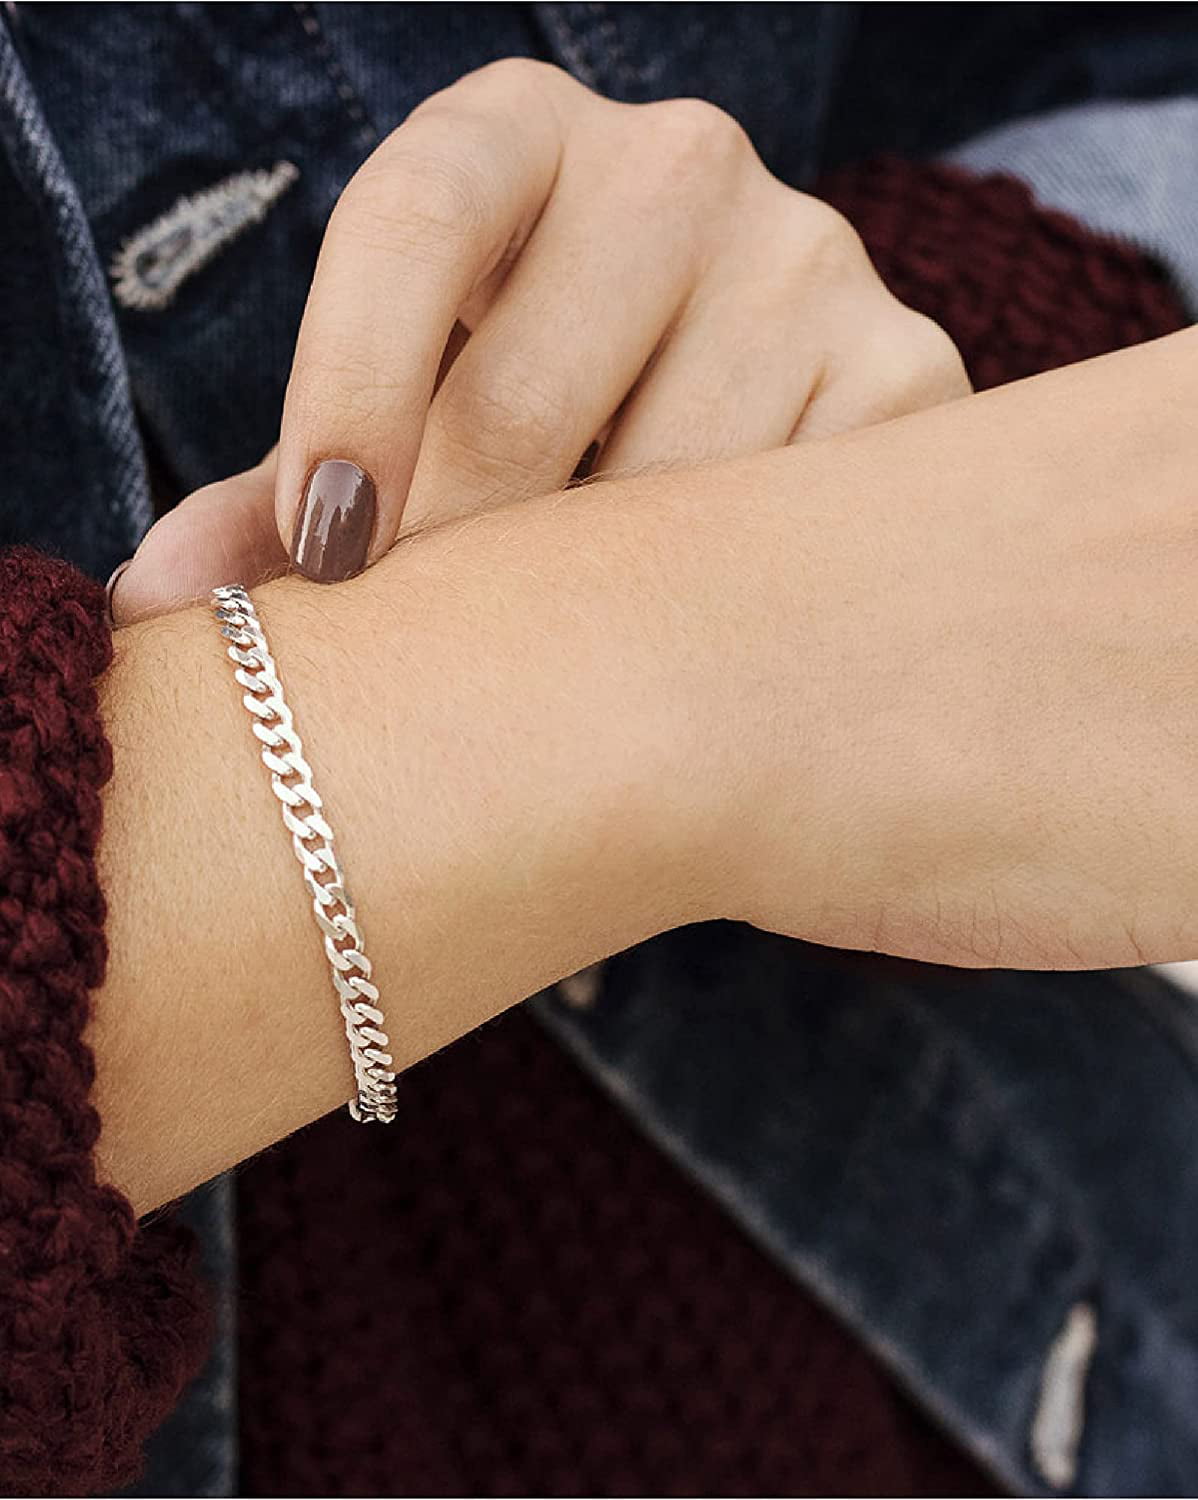 Starry Silver Full Star Sterling Silver Bangle Bracelets Wholesale Womens  Jewelry With Push Pull Hand Design Perfect Valentines Day Gift From  Lichun11, $34.4 | DHgate.Com